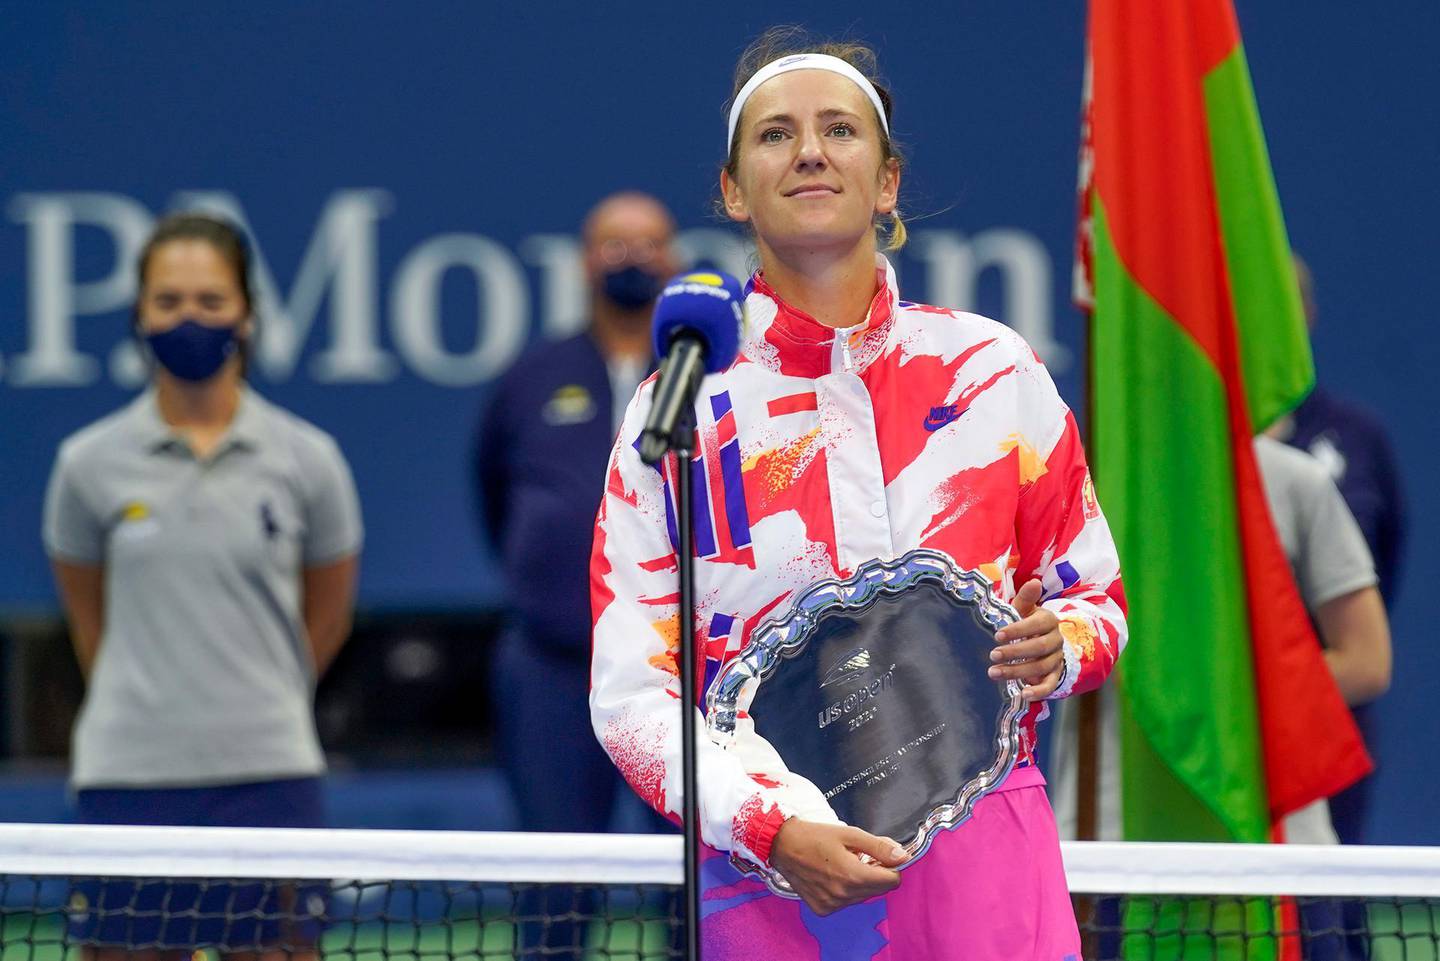 Victoria Azarenka, of Belarus, holds the runner-up trophy after losing to Naomi Osaka, of Japan, in the women's singles final of the US Open tennis championships, Saturday, Sept. 12, 2020, in New York. (AP Photo/Seth Wenig)